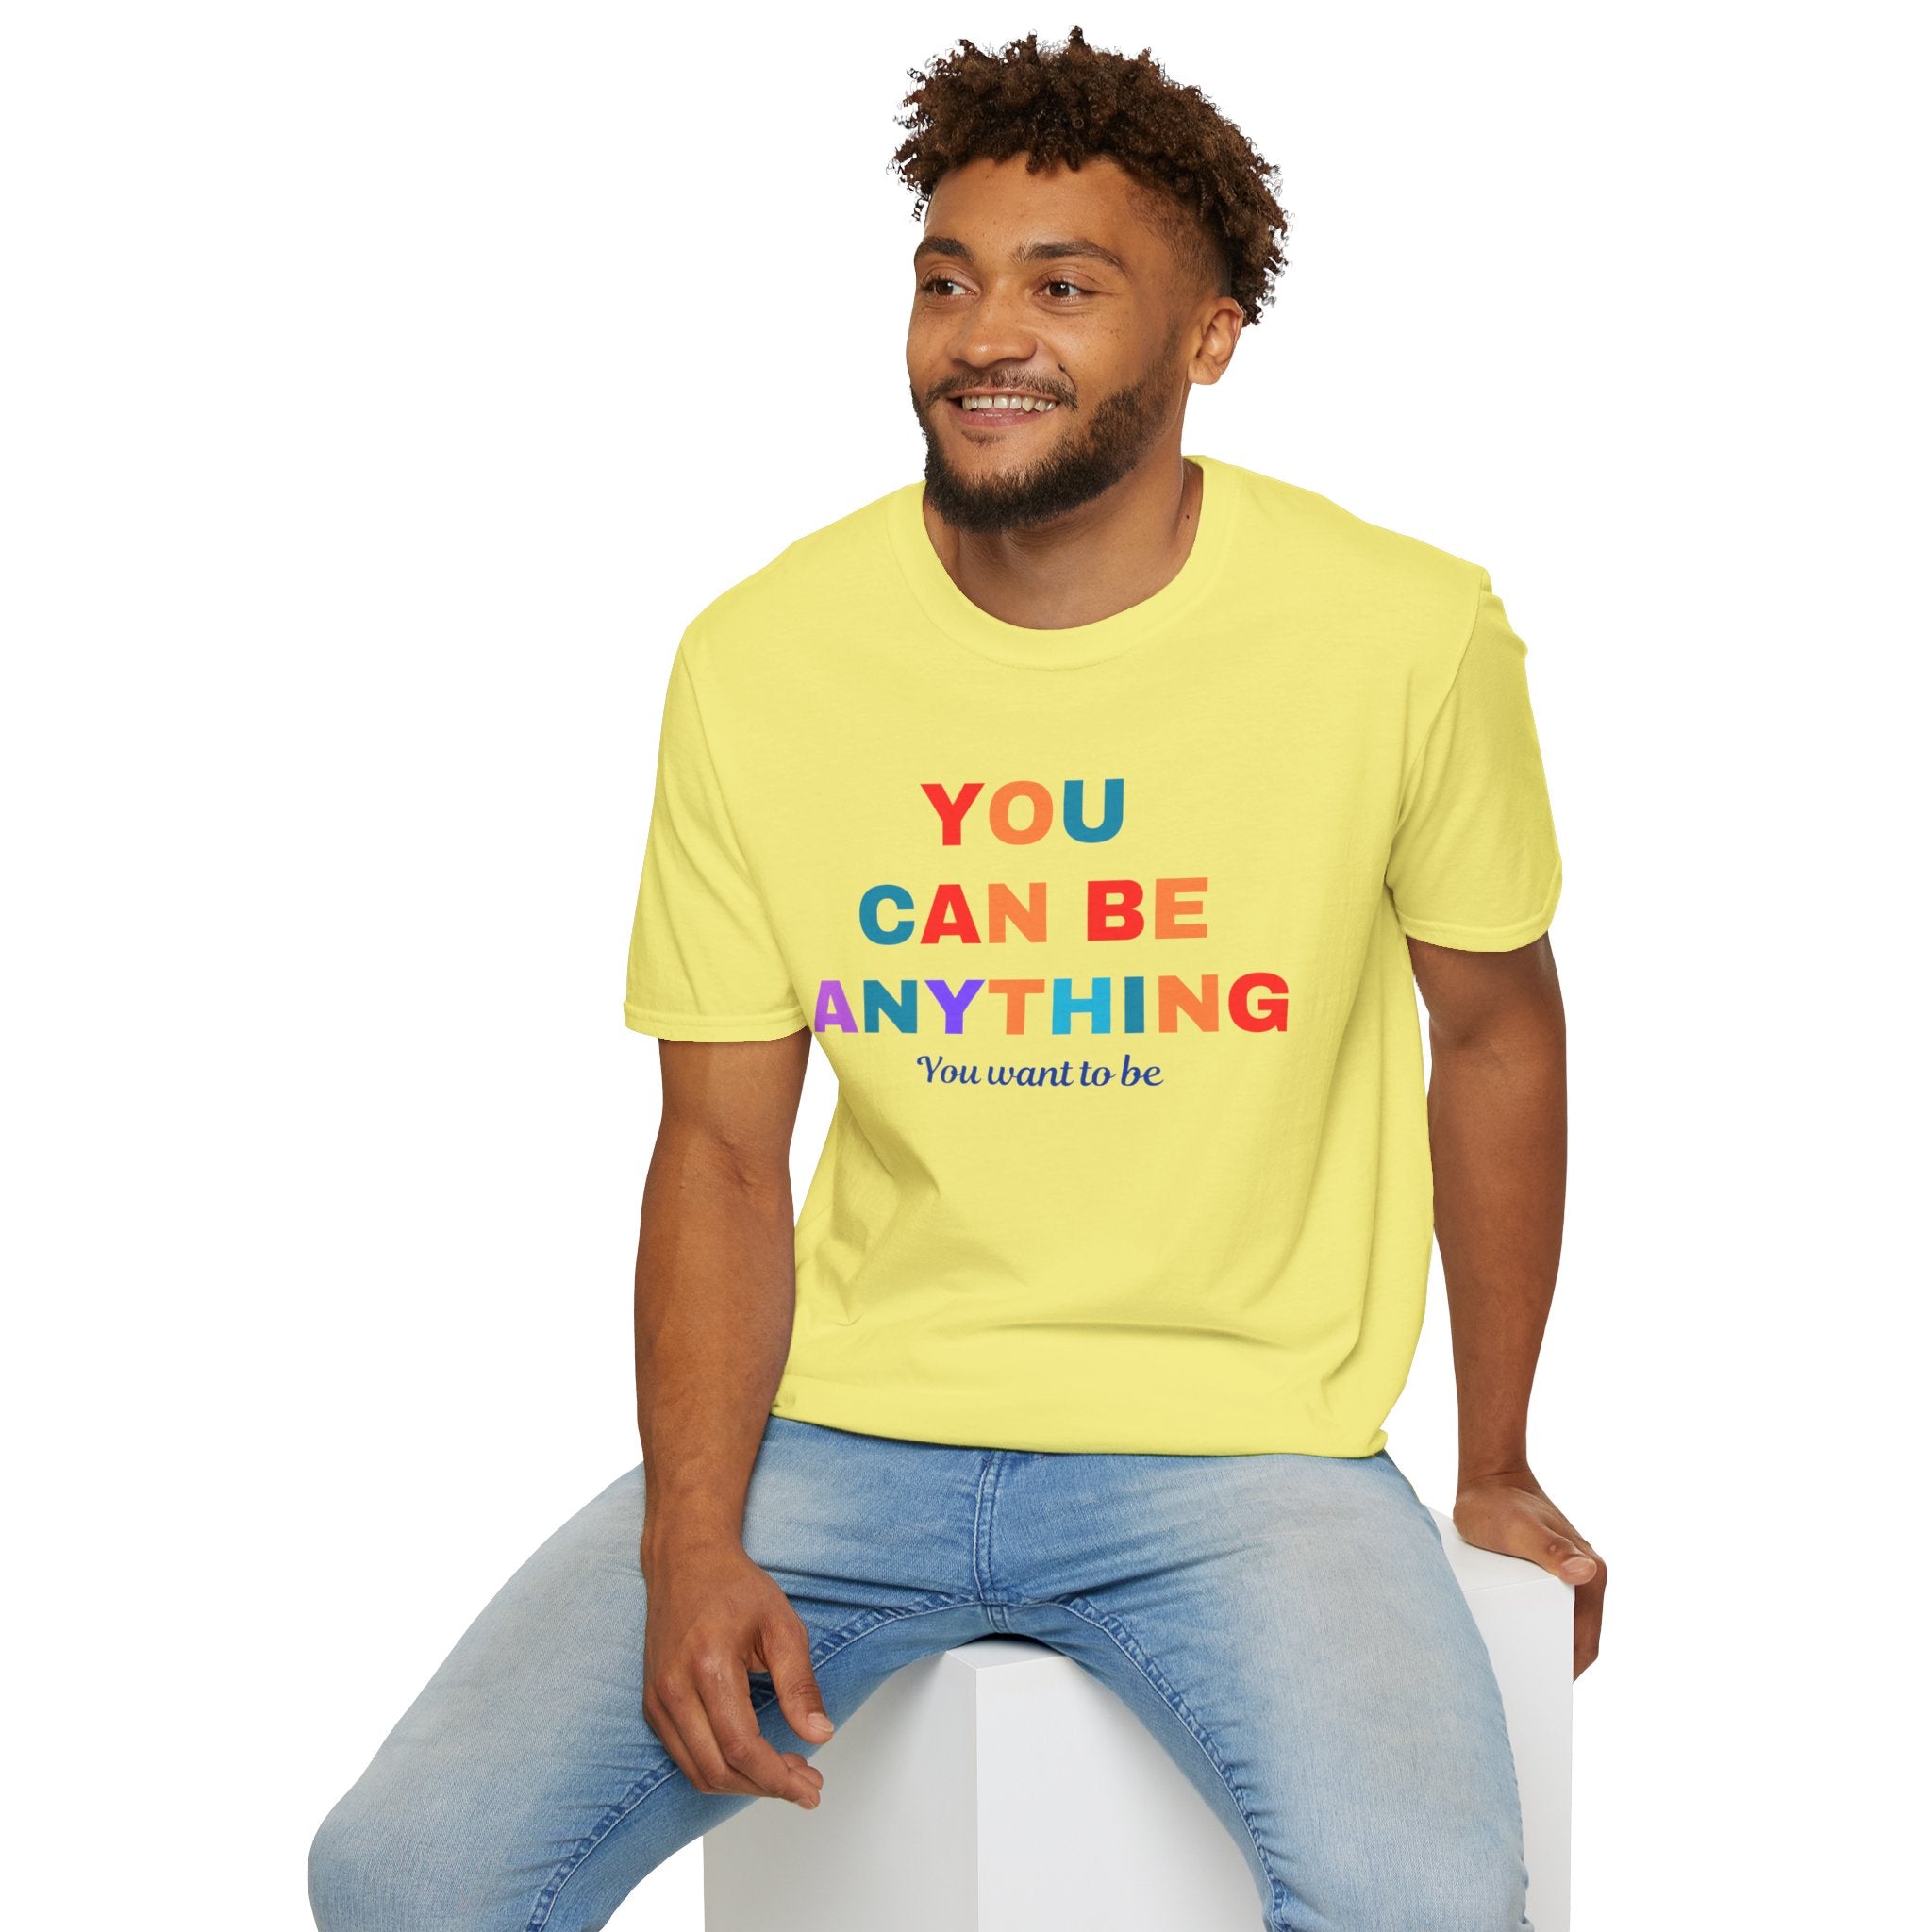 You Can be Anything You wan to Be Unisex Softstyle T-shirt, Teacher T-shirt, Motivational T-shirt, Graphic Tees, Social Worker T-shirt